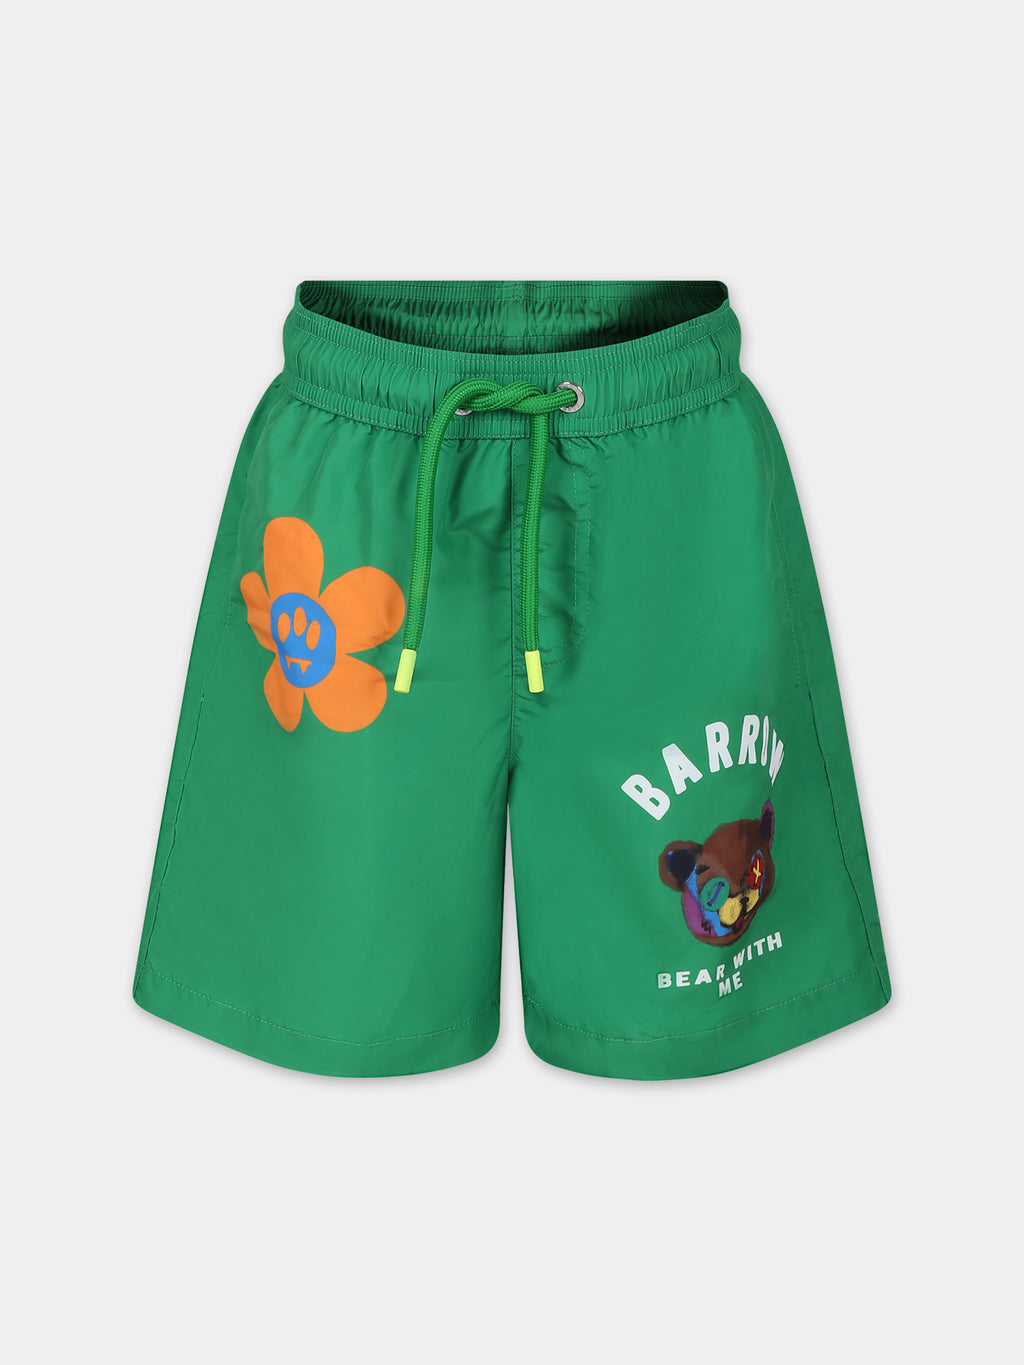 Green swim shorts for boy with smiley and logo